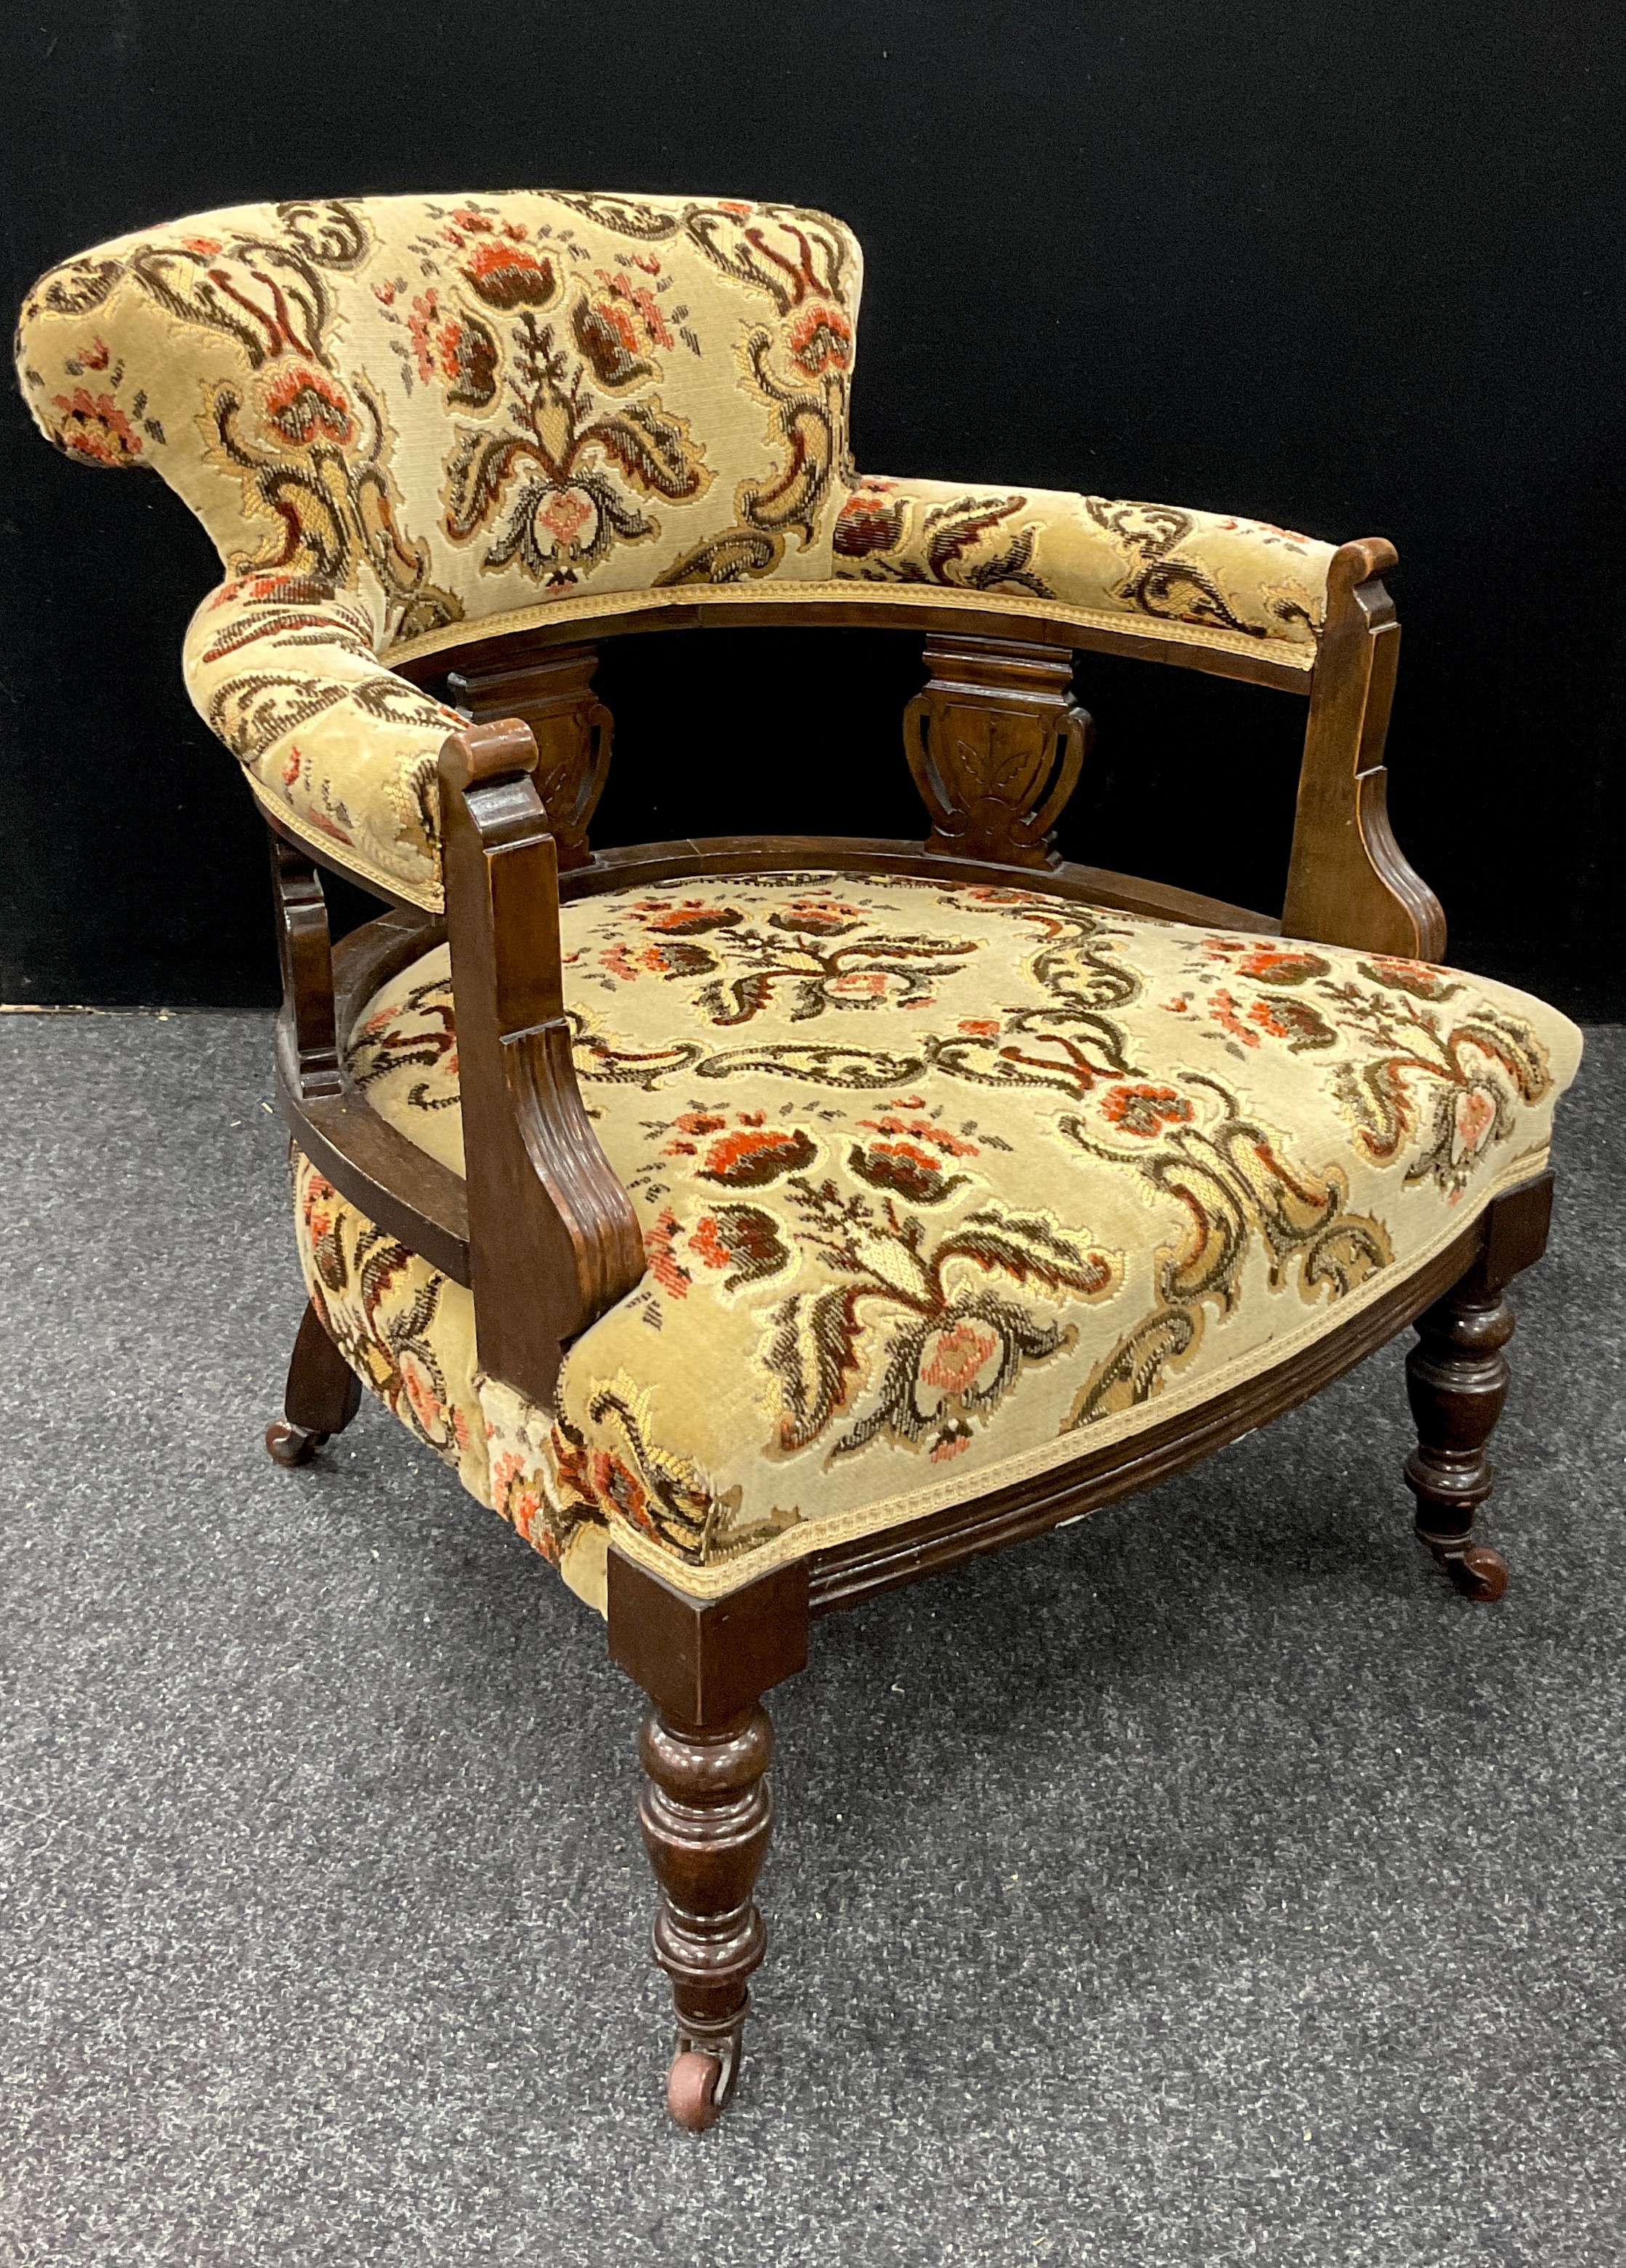 A Victorian inlaid tub chair, floral upholstery, turned fore legs